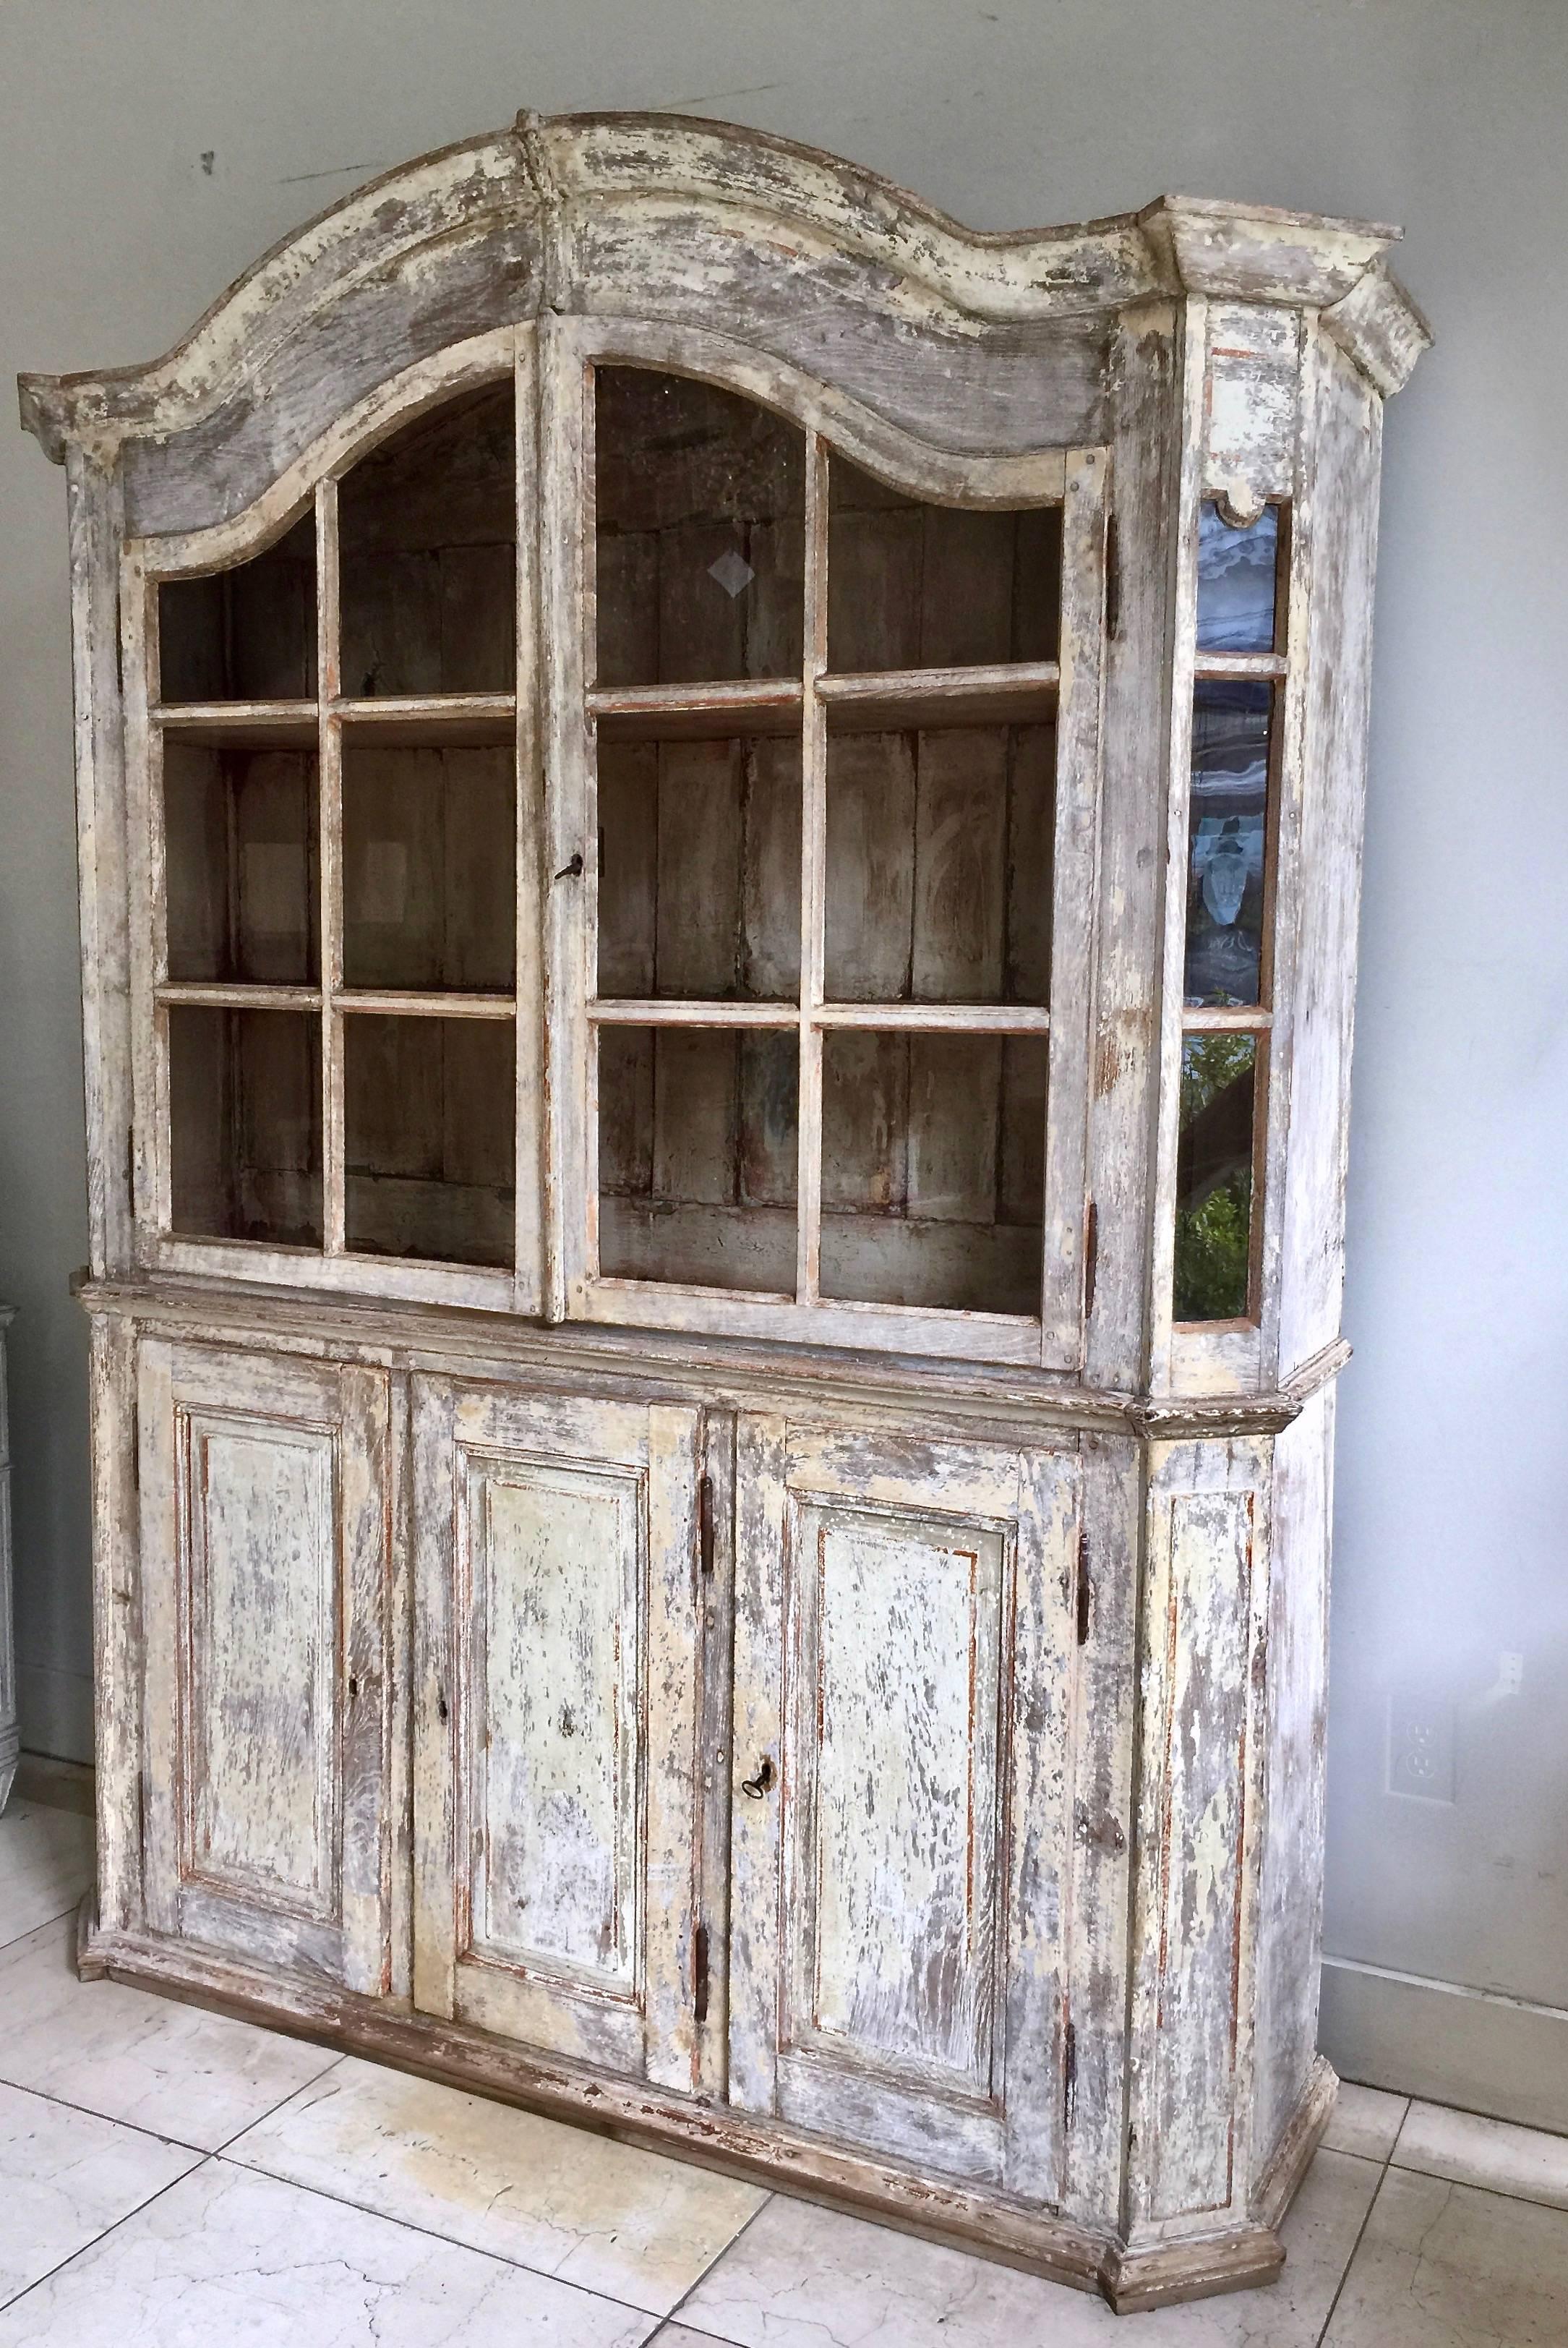 A very handsome 18th century French bookcase/vitrine cabinet in impressive scale with arched pediment cornice and panelled doors on three door cabinet base with bank of drawers inside of the middle section - all in time worn original patina.
Here